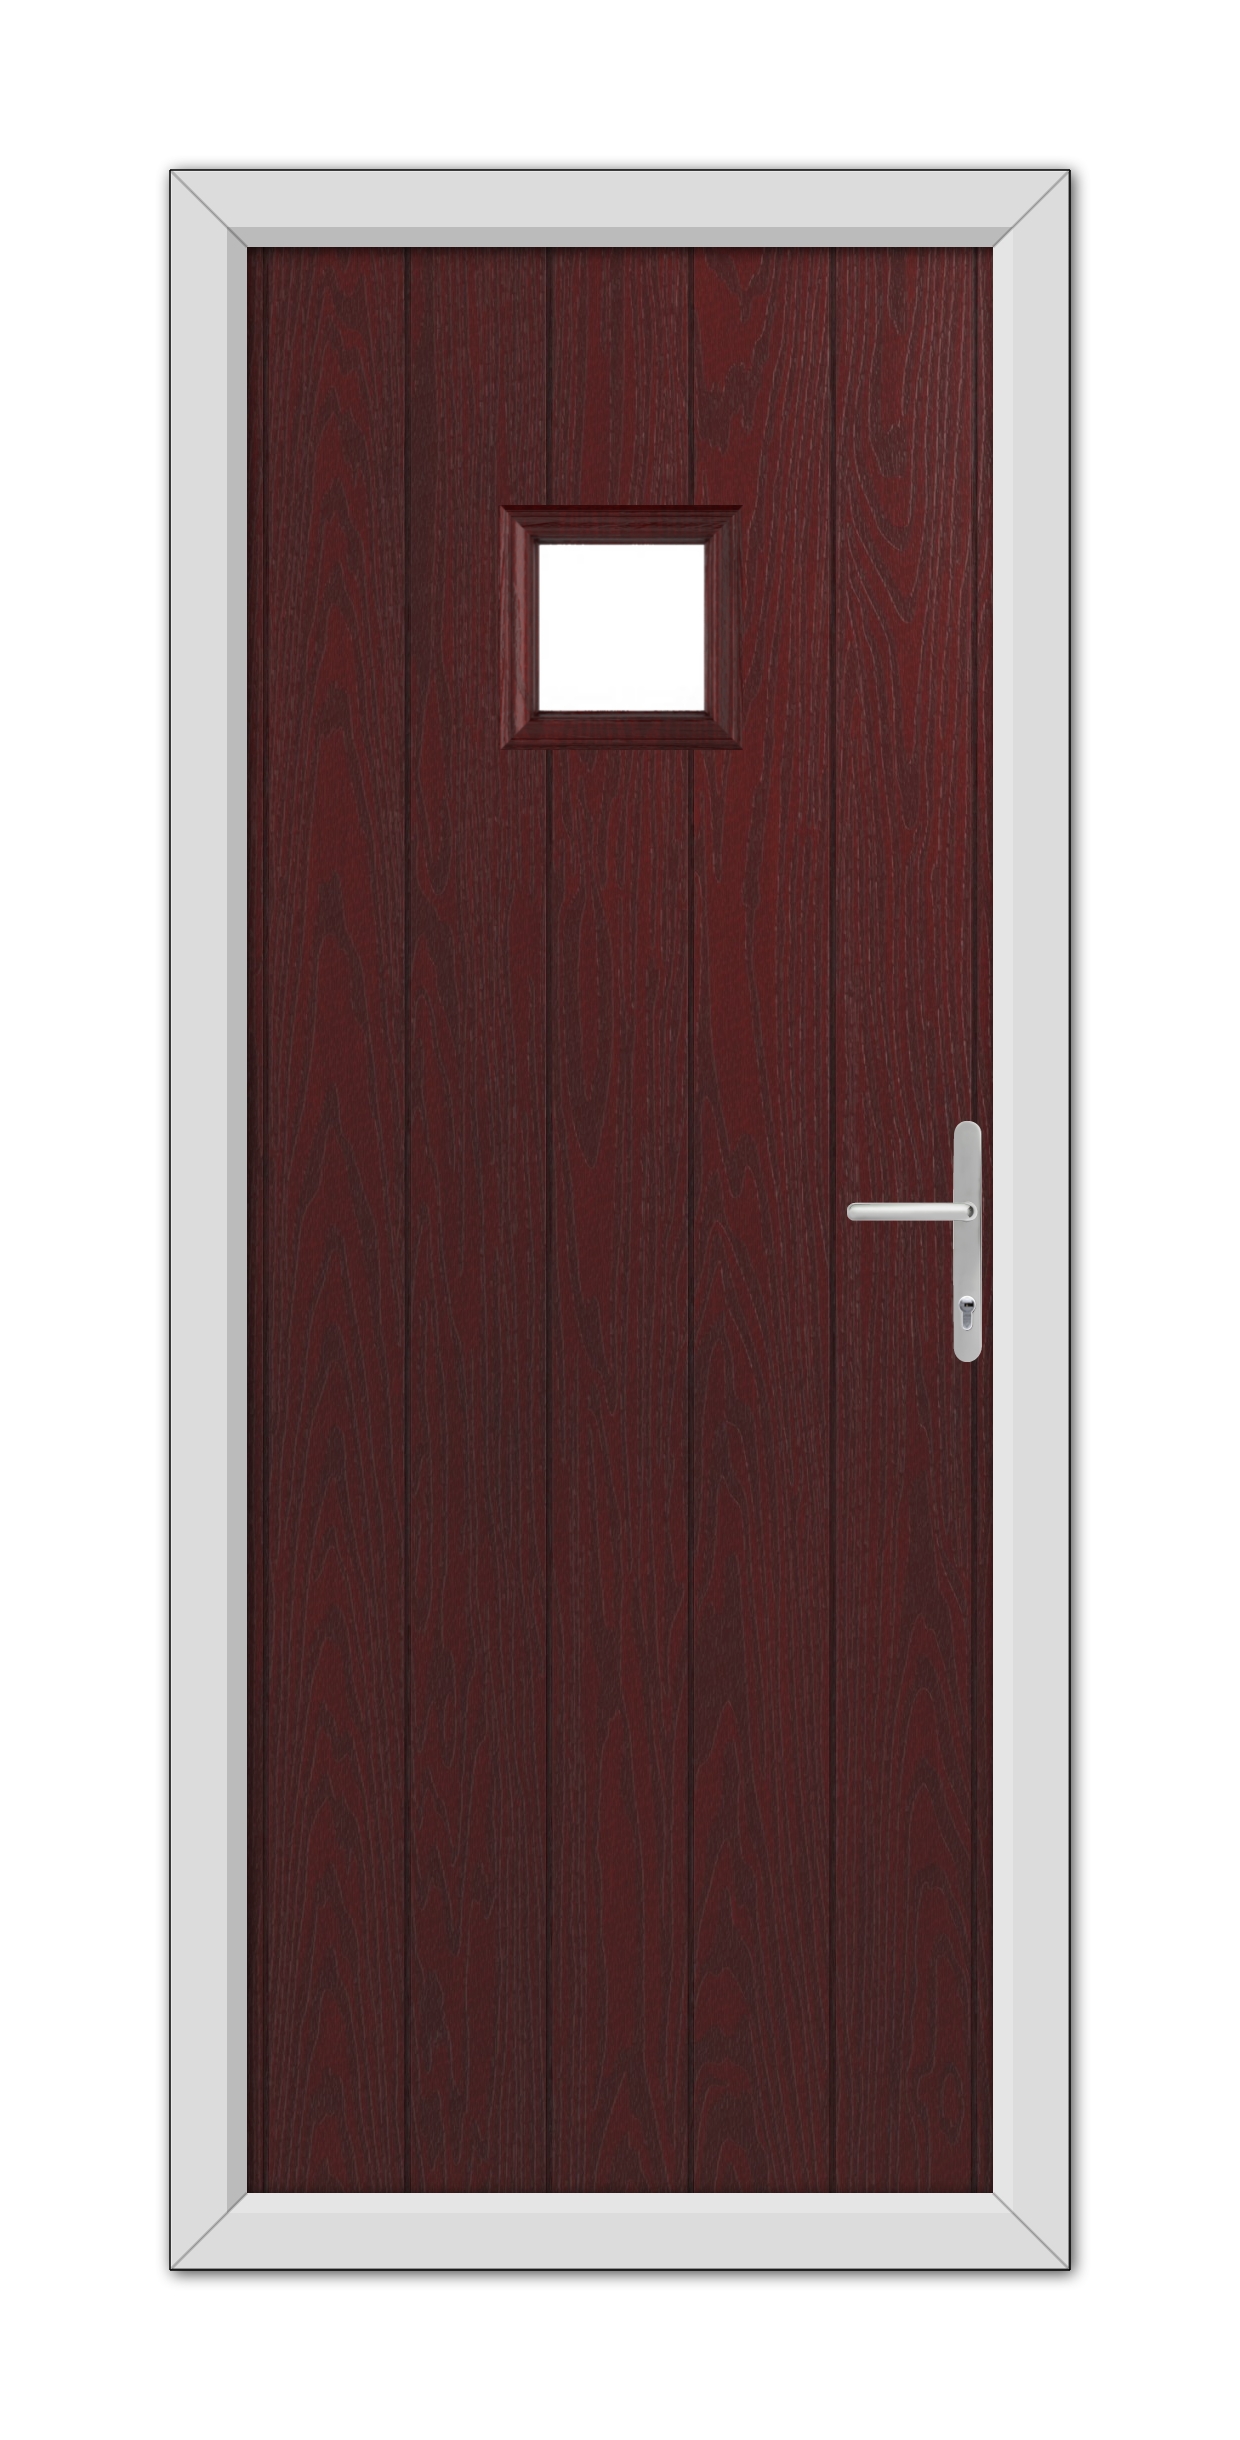 Closed Rosewood Brampton Composite Door with a small window and a metal handle, framed by a white door frame.